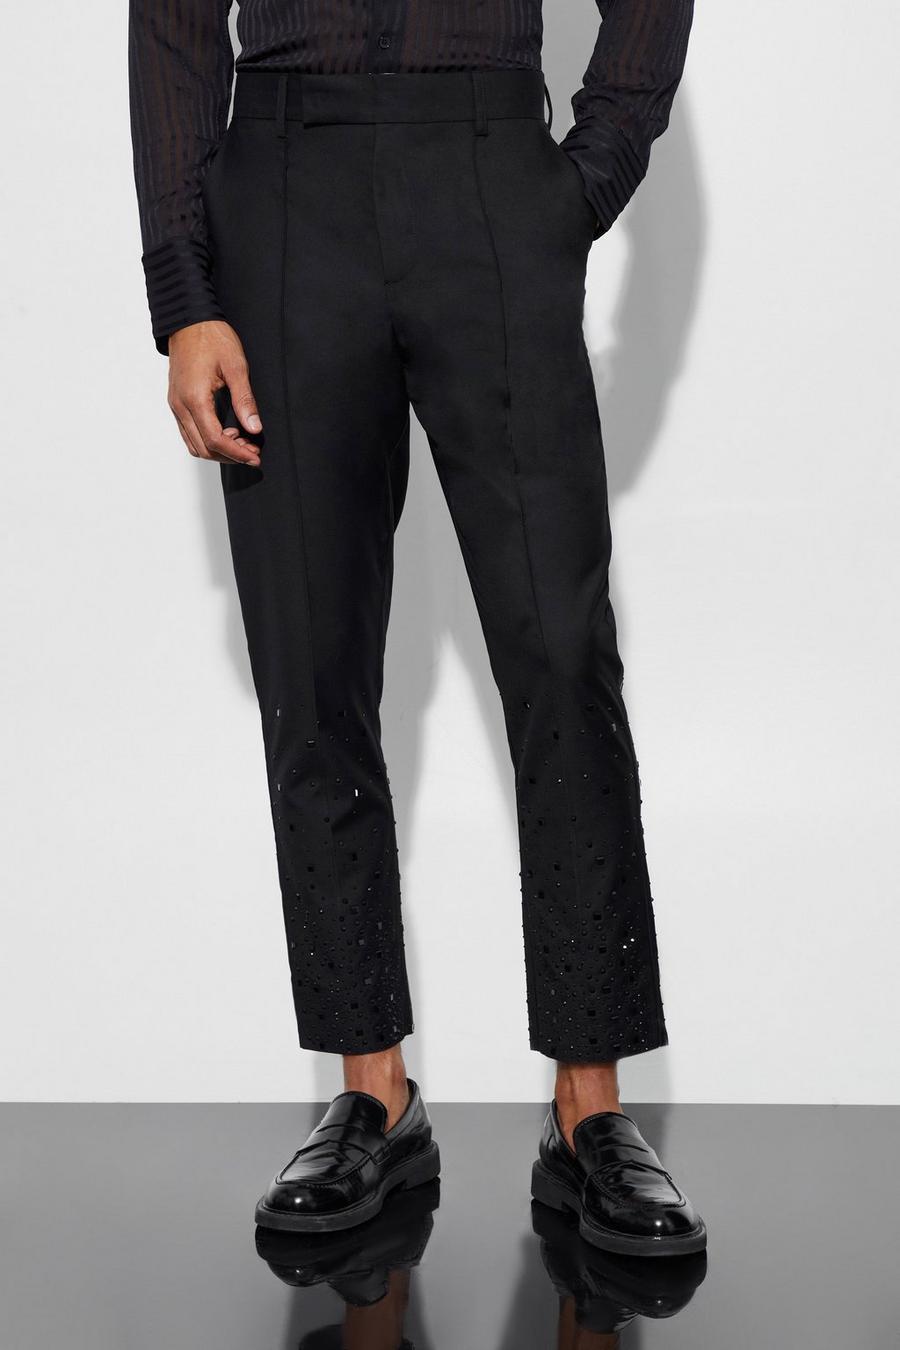 Black Rhinestone Detail Tapered Suit Trousers